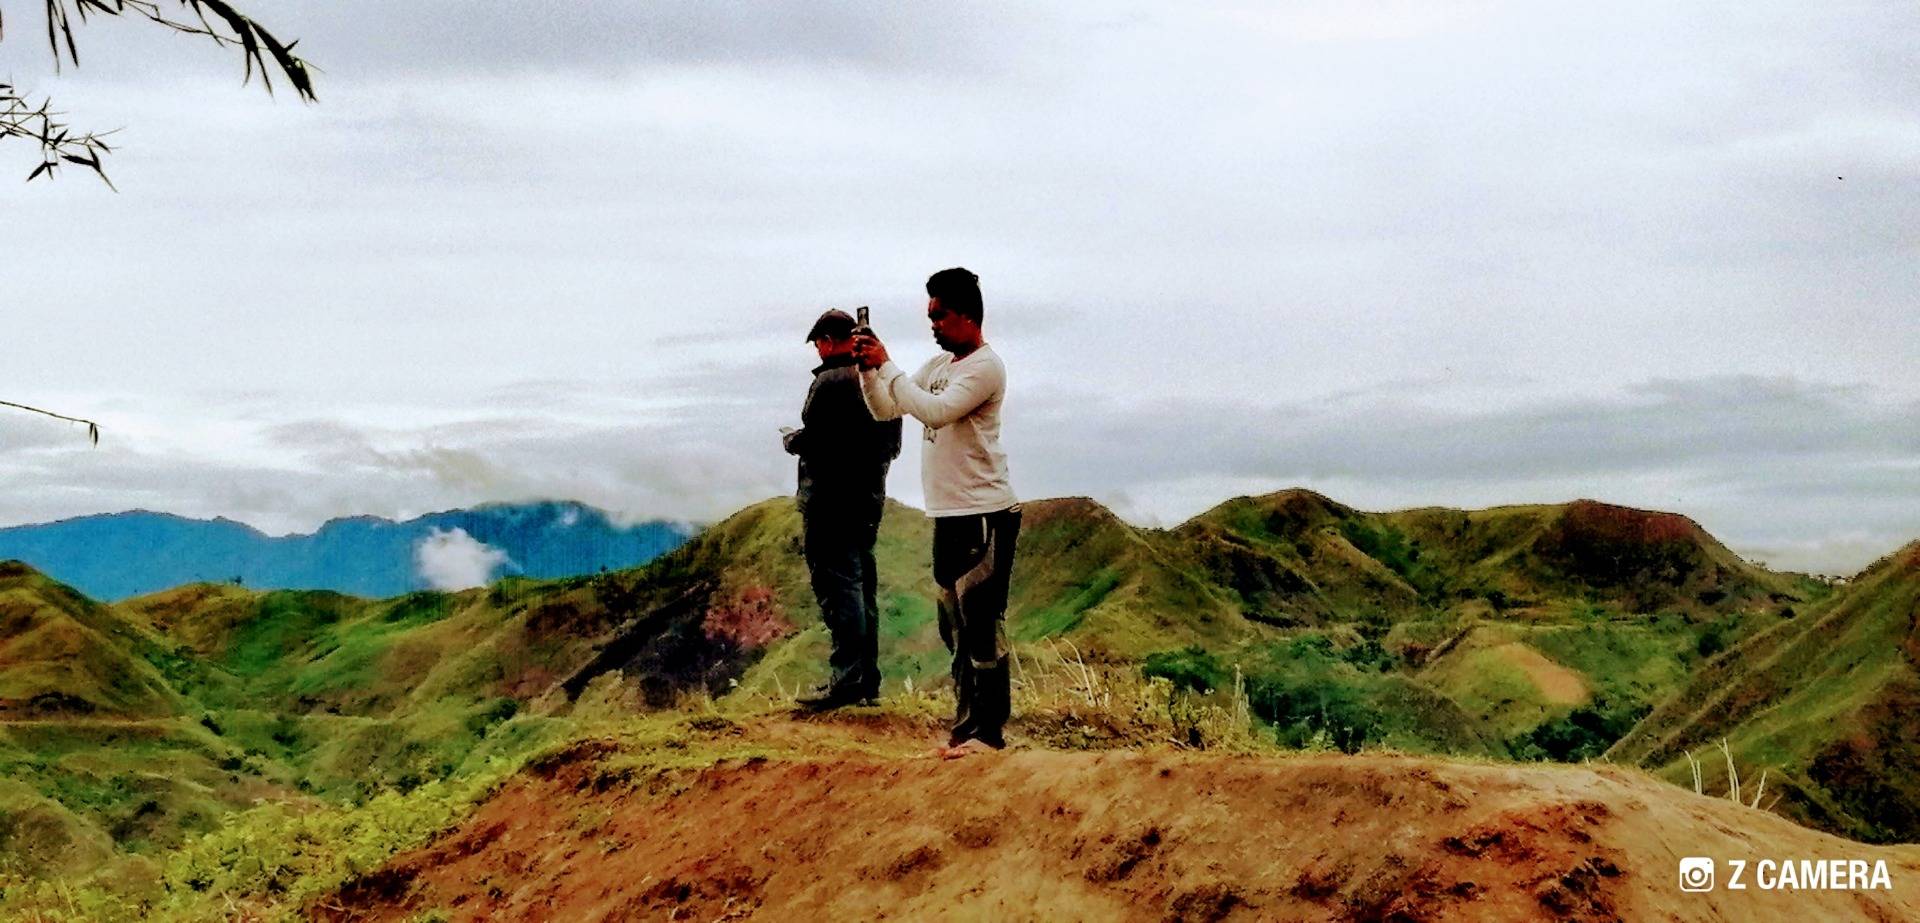 Amazing valley and mountains! They were the stranger who came along my way who shared their kindness. The journalist name John Paul Seniel, working in GMA 7, a tv station base in Mindanao.